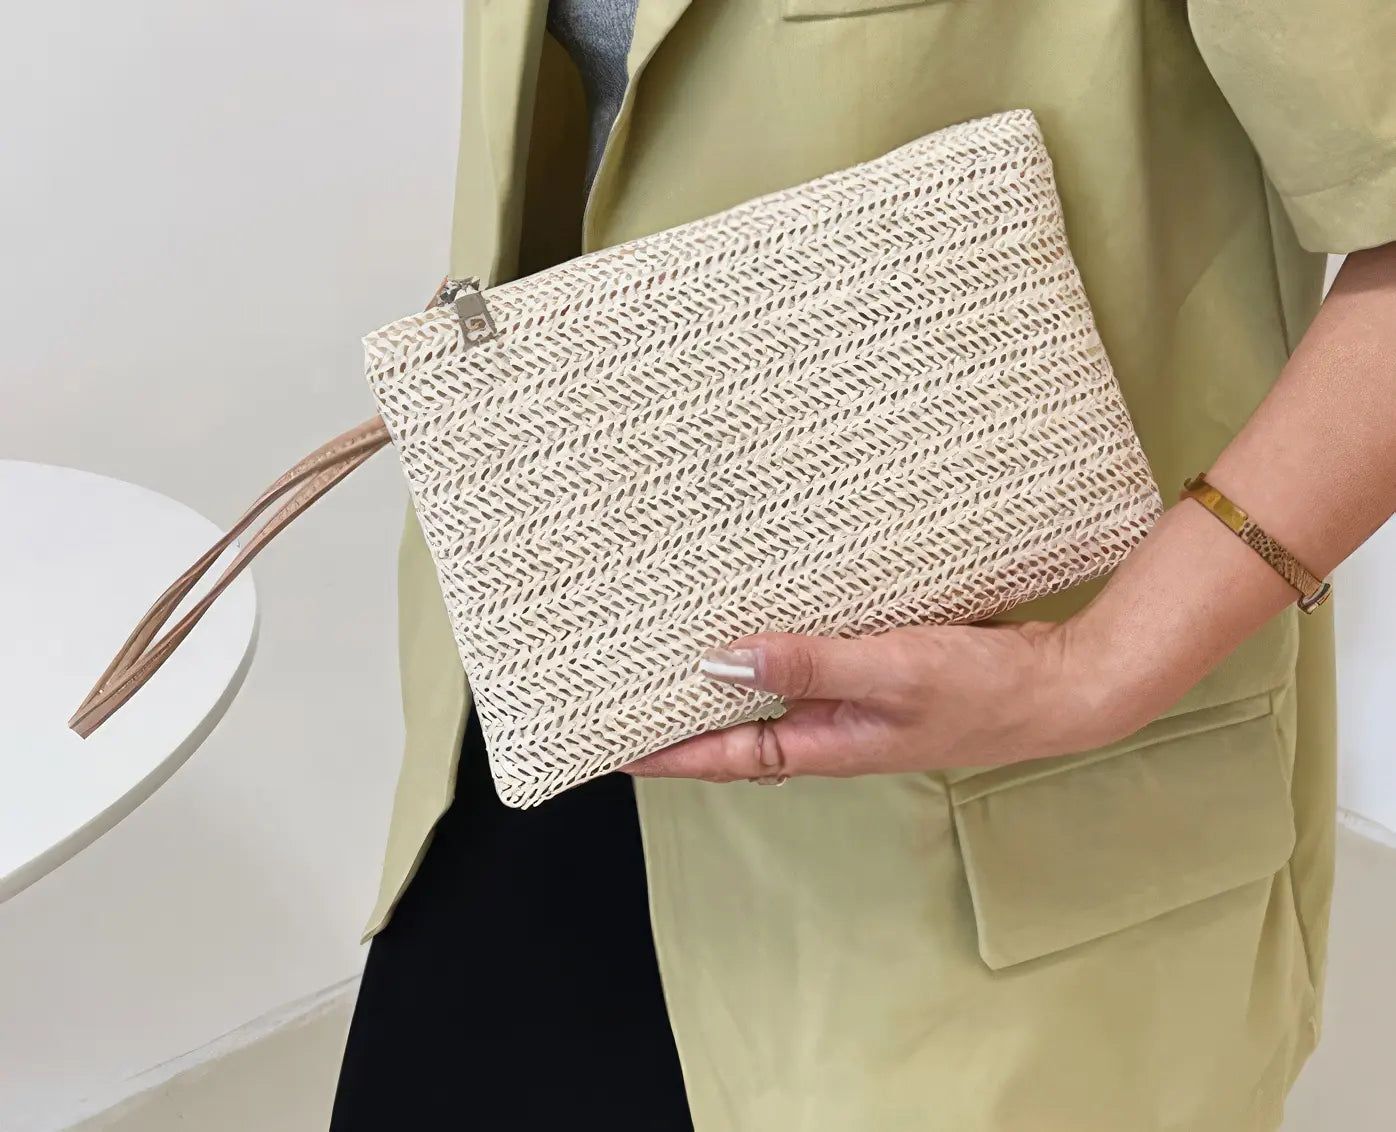 Woven Straw Clutch Wristlet Bag with Leather Handle in Cream